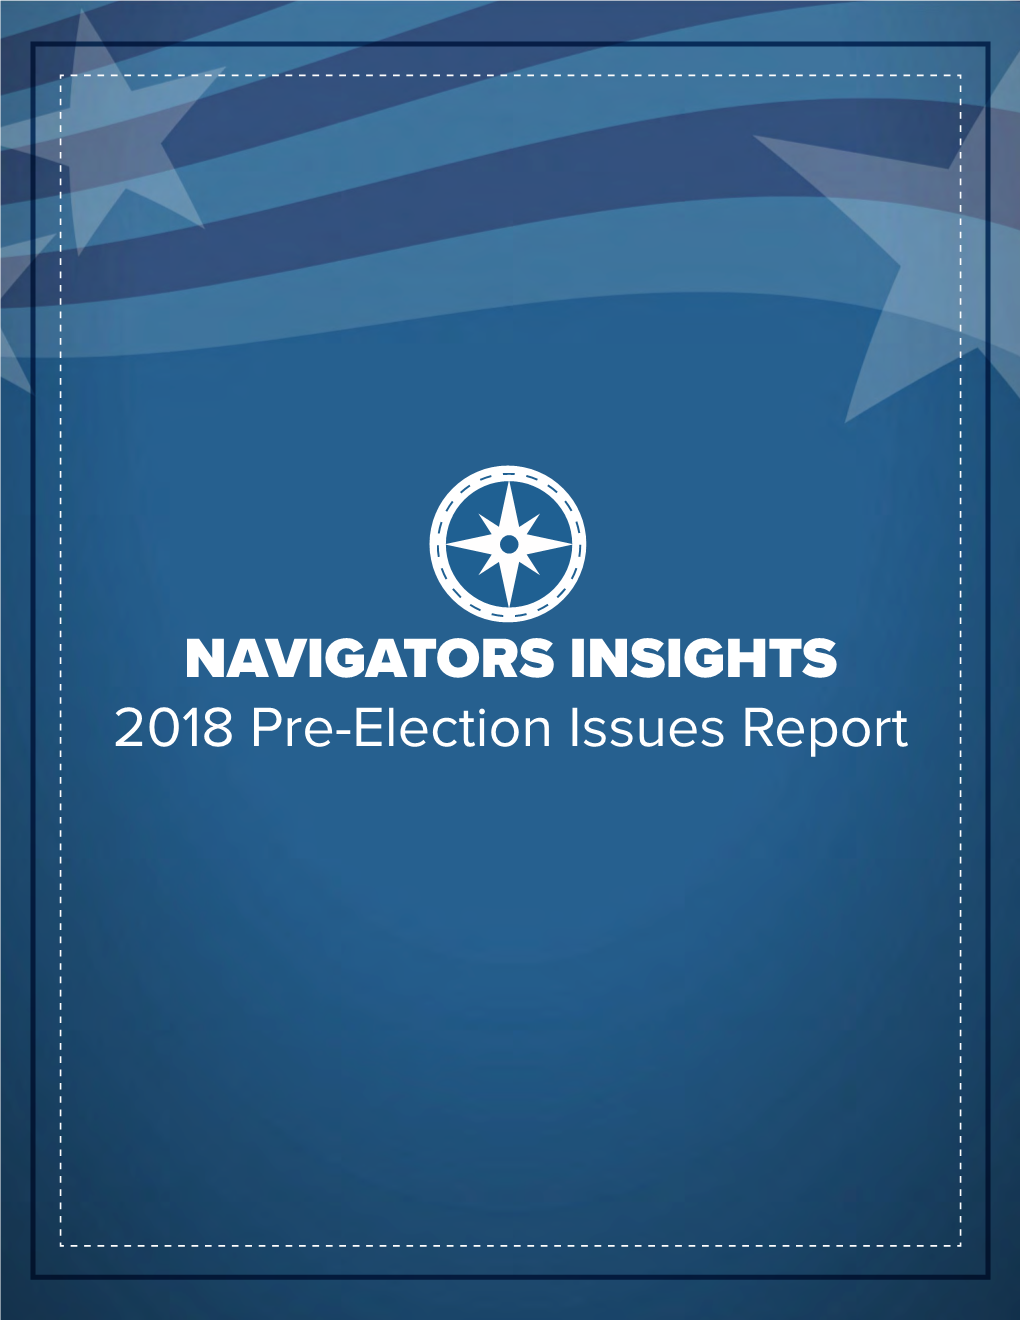 NAVIGATORS INSIGHTS 2018 Pre-Election Issues Report Background